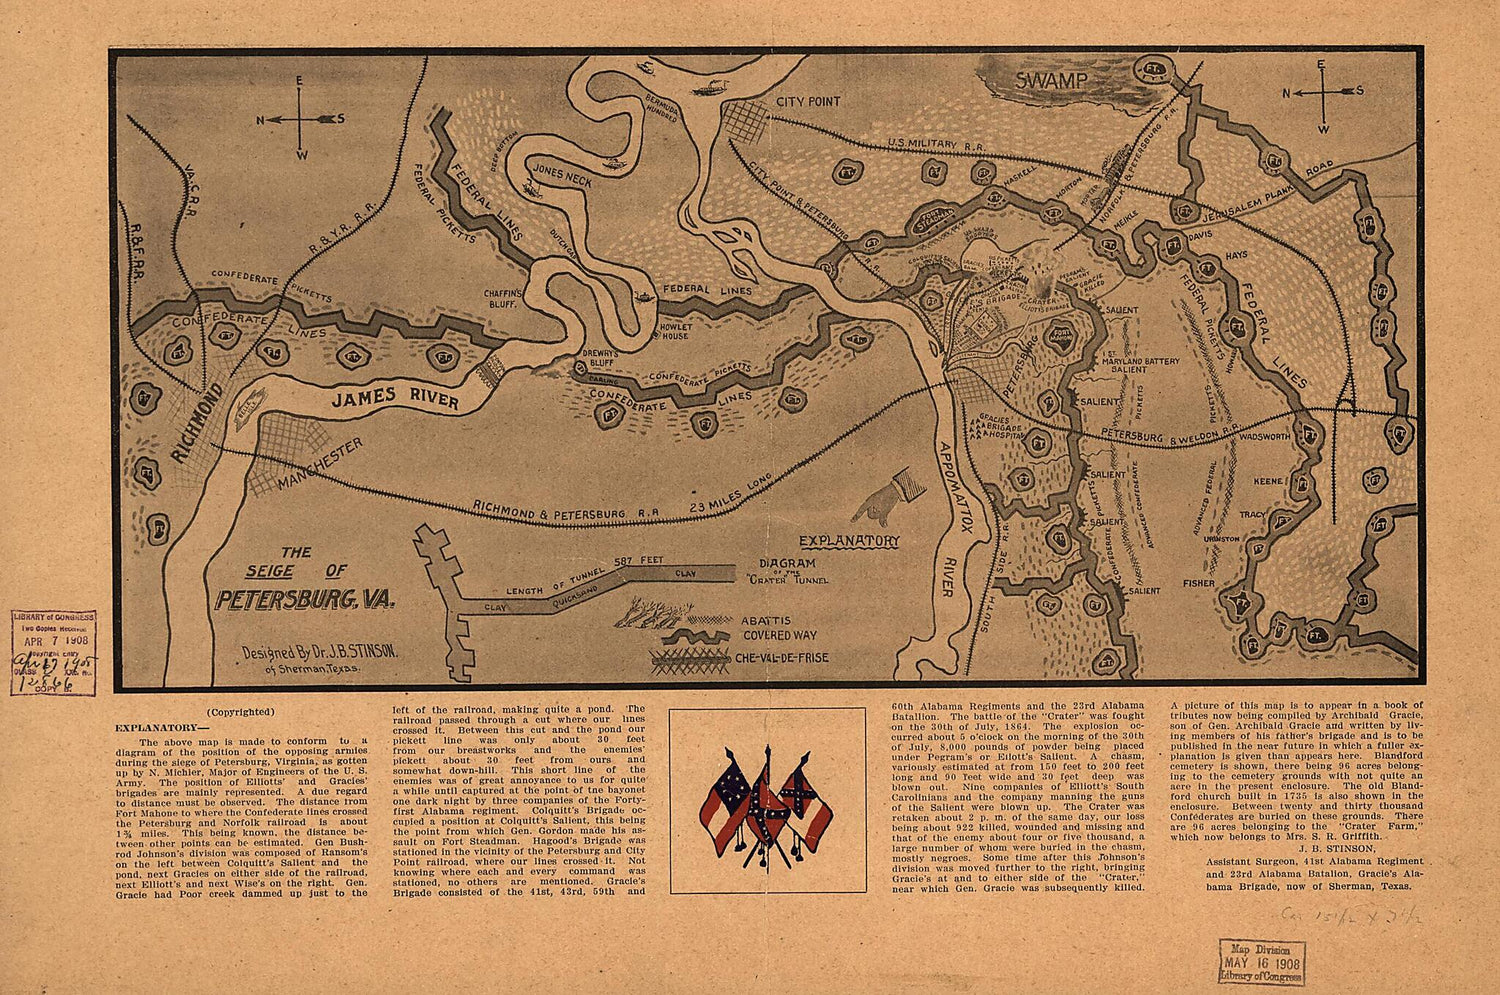 This old map of The Seige sic of Petersburg, Va. (Siege of Petersburg, Va) from 1908 was created by J. B. Stinson in 1908